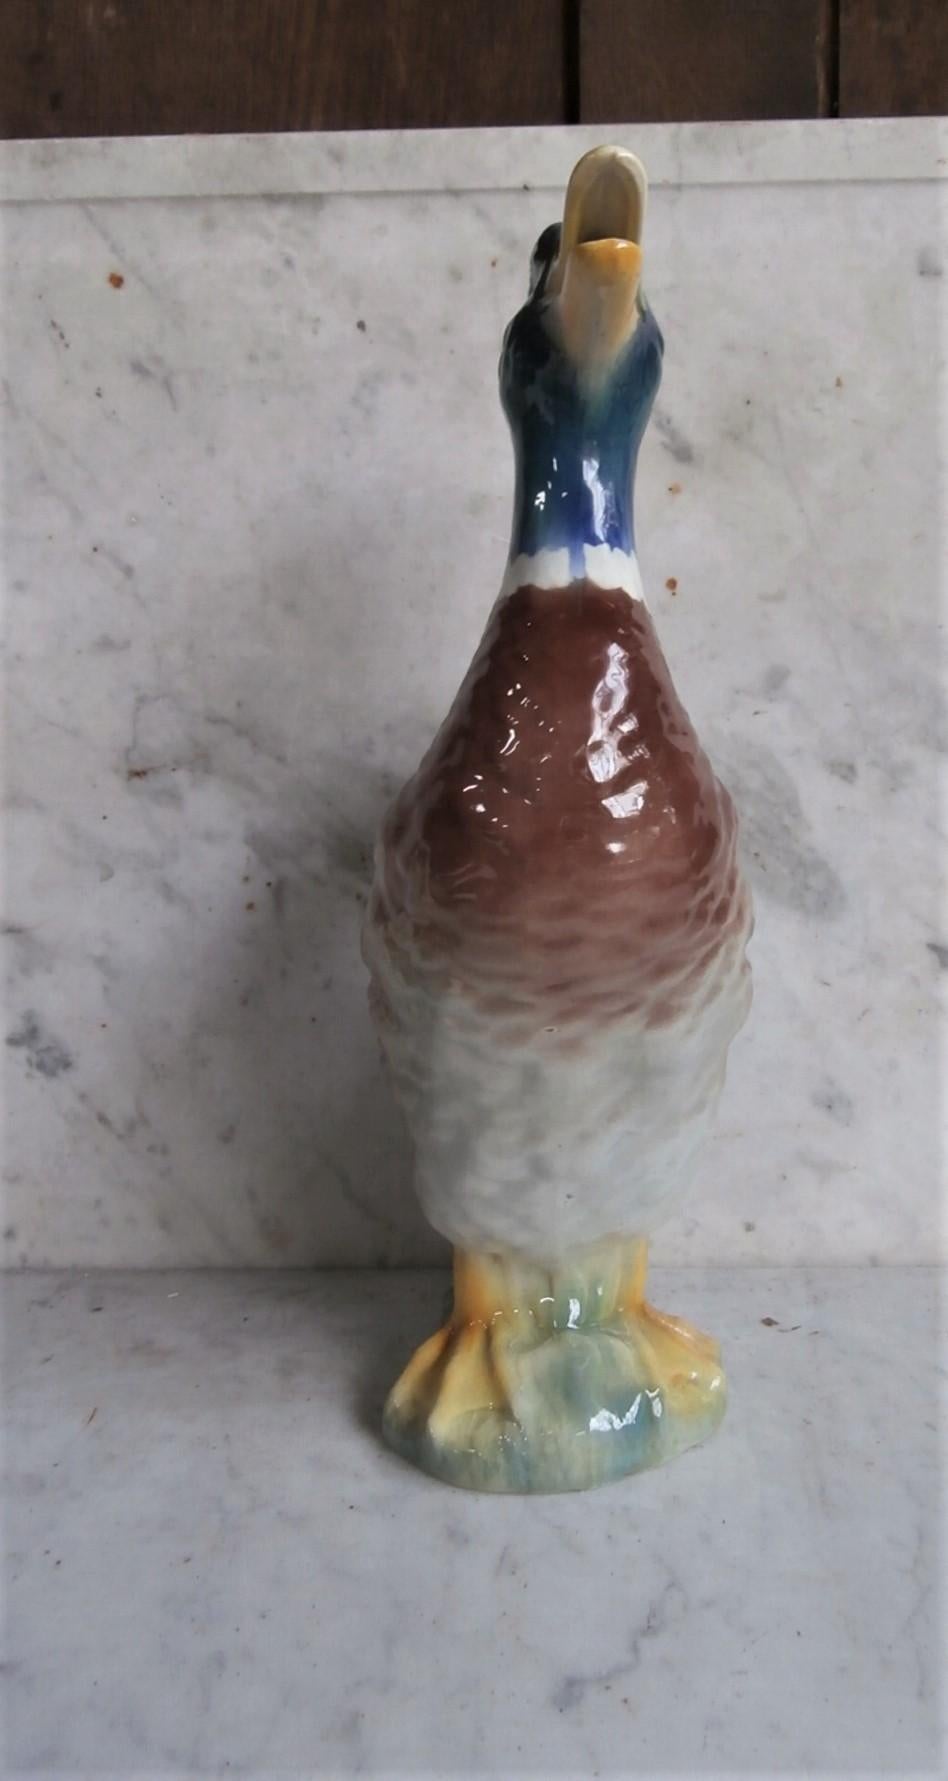 Majolica duck mallard pitcher Keller et Guerin Saint Clement, circa 1900.
This model is the original one, who existed on different sizes this one is number 3.